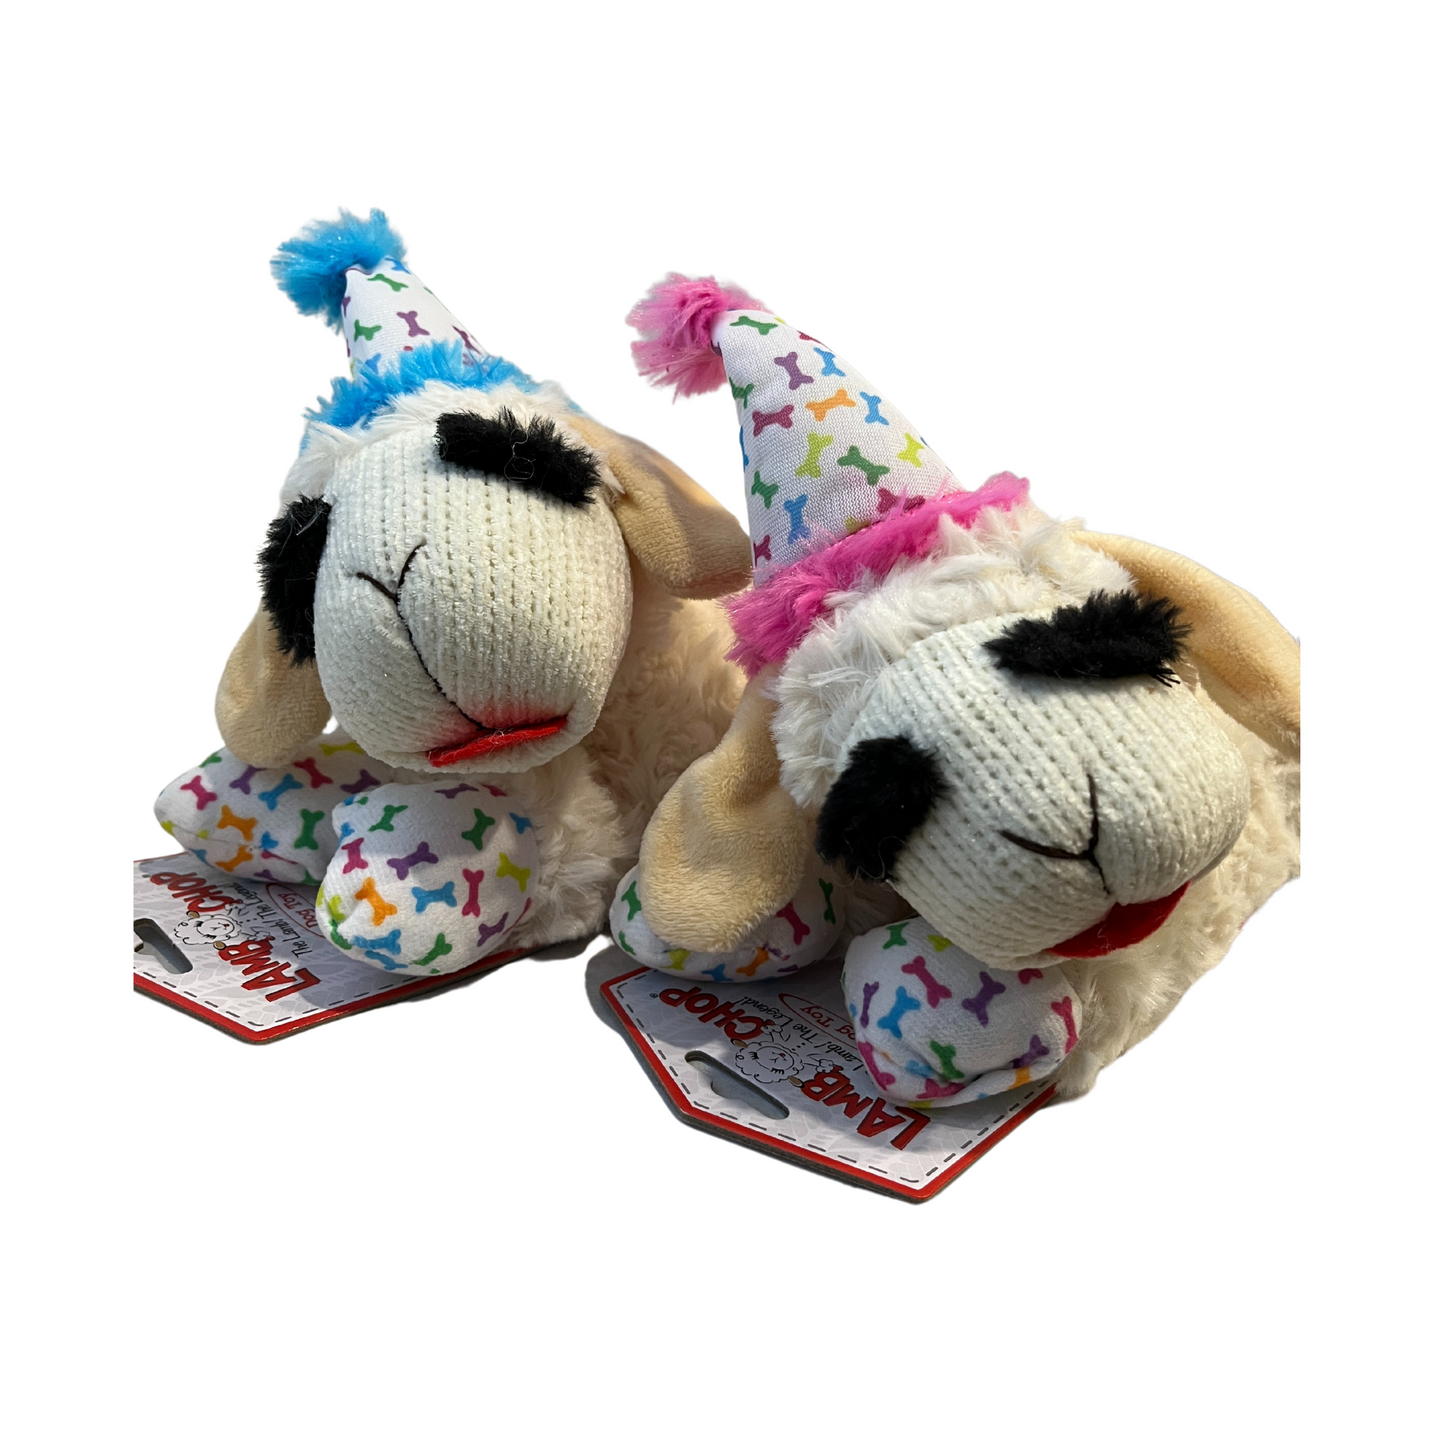 Multipet Birthday Lamb Chop Dog Toys with Hat 10.5".  Blue Hat and Pink Hat toys are featured.